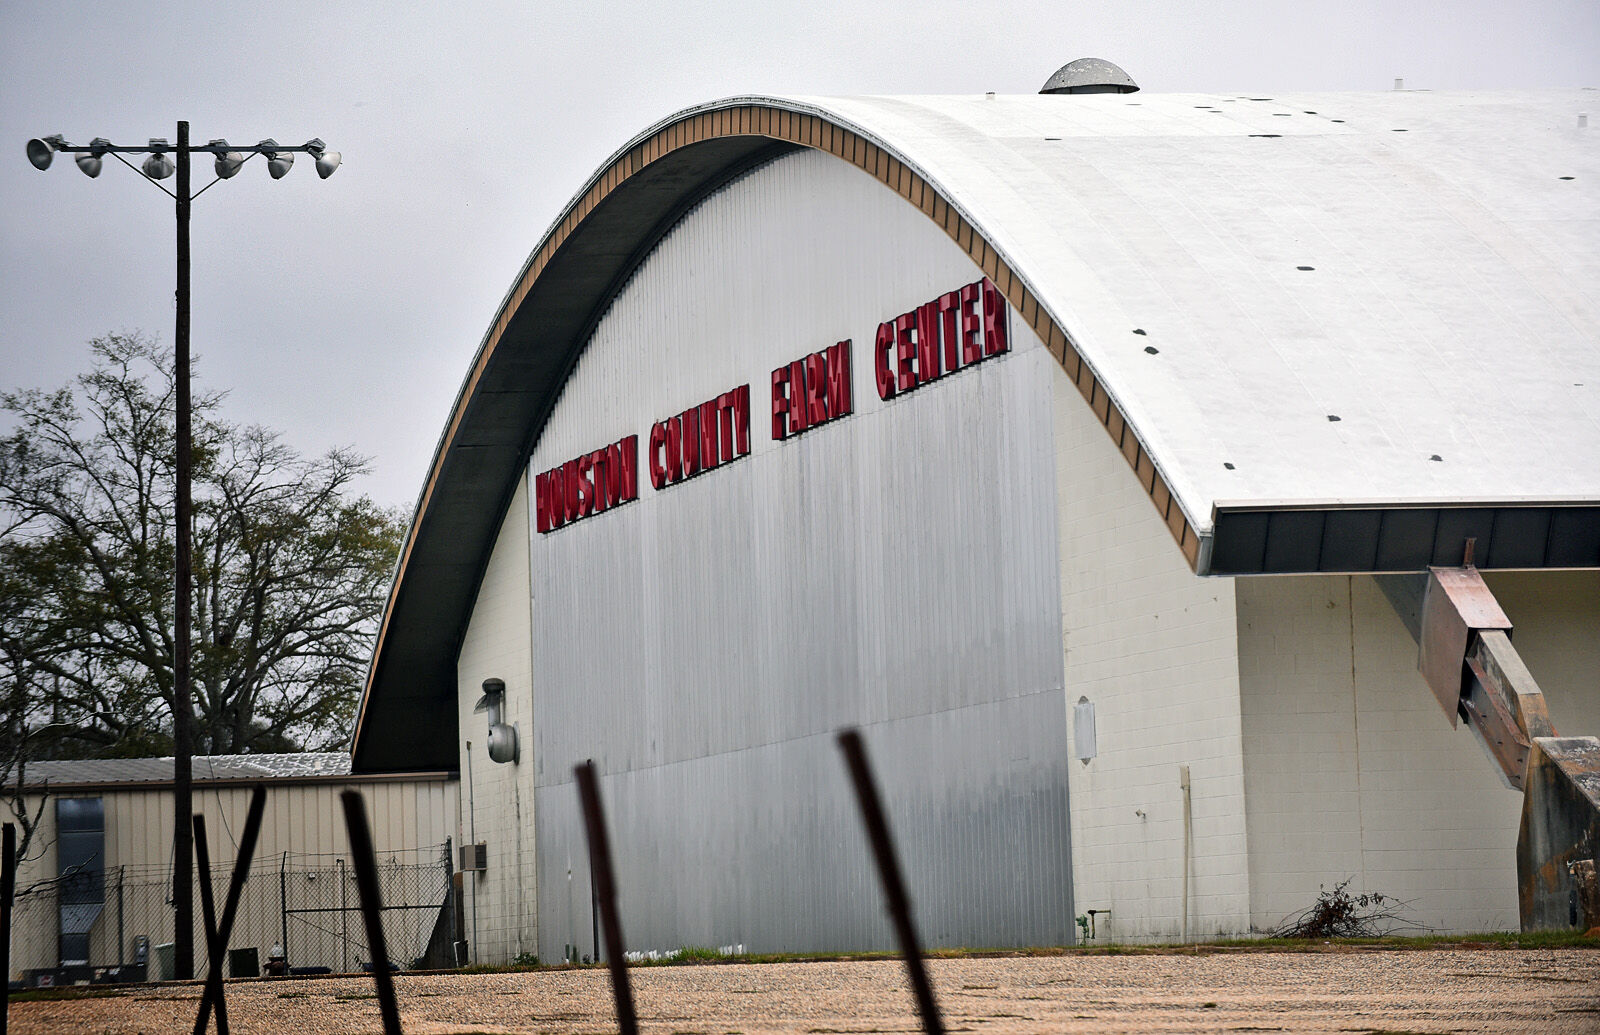 Houston County seeks delay on farm center sale to Dothan picture